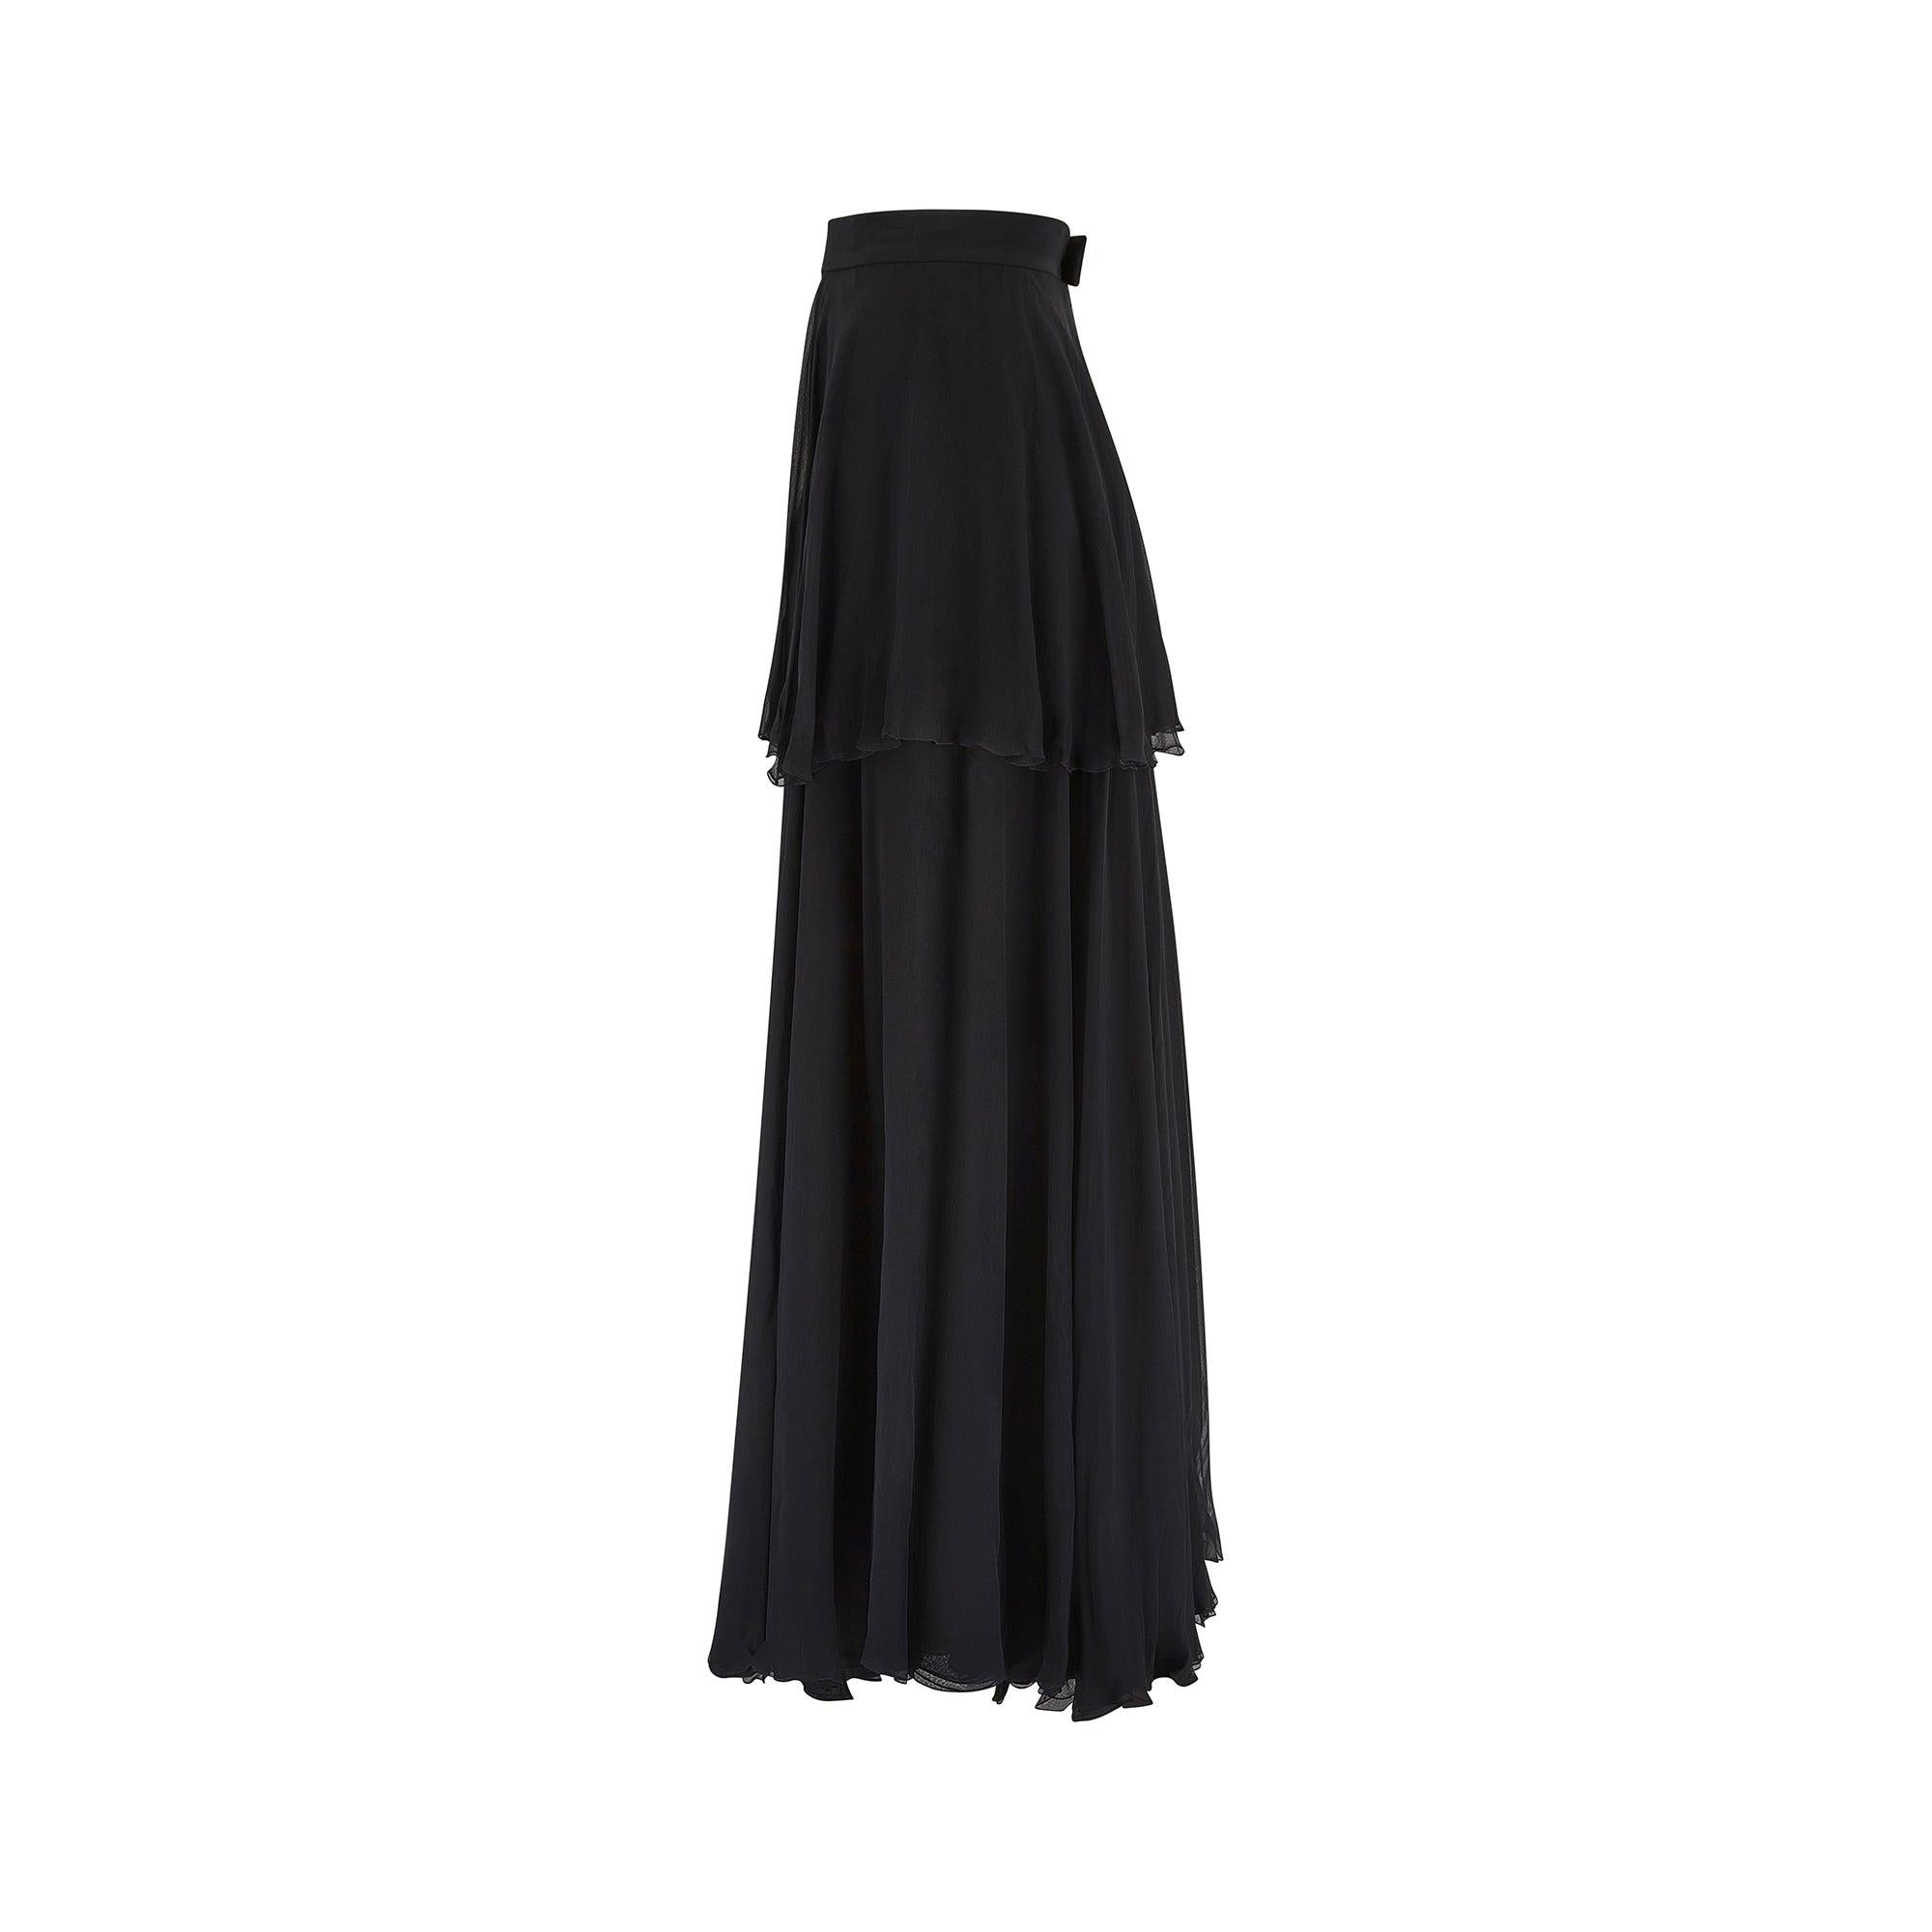 This elegant, black silk chiffon skirt was designed by Karl Lagerfeld for Chanel in the 1990s. Bringing the brand’s timeless sophistication to a floaty maxi-skirt style, this piece is cut with a flattering high waist and free-flowing silhouette. The